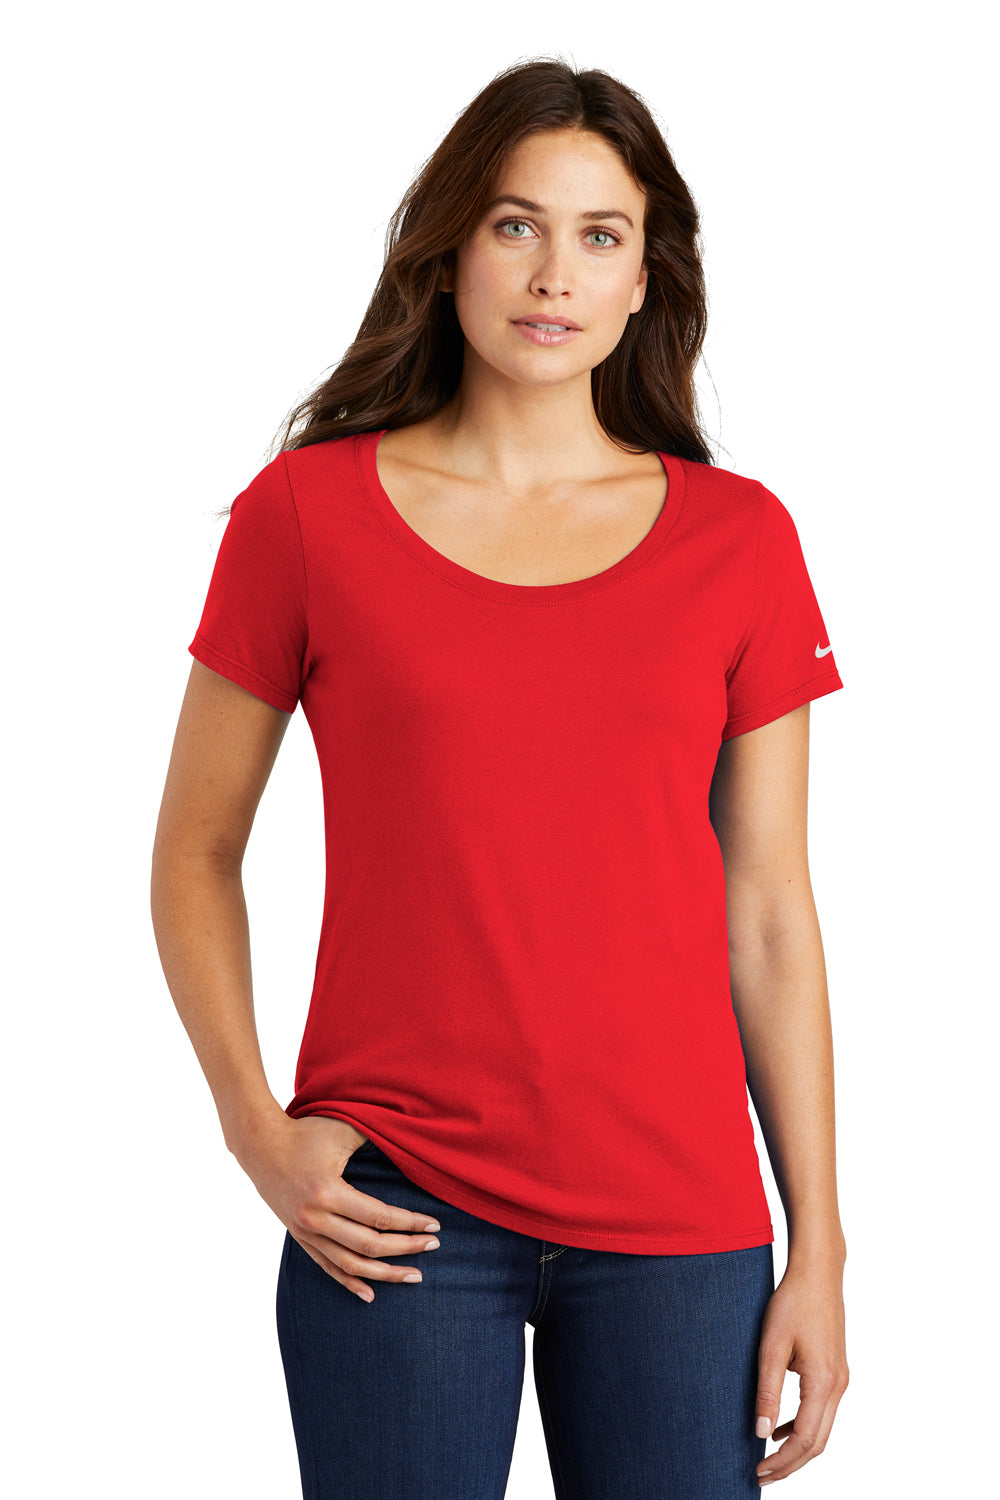 Nike NKBQ5236 Womens Core Short Sleeve Scoop Neck T-Shirt Red Front